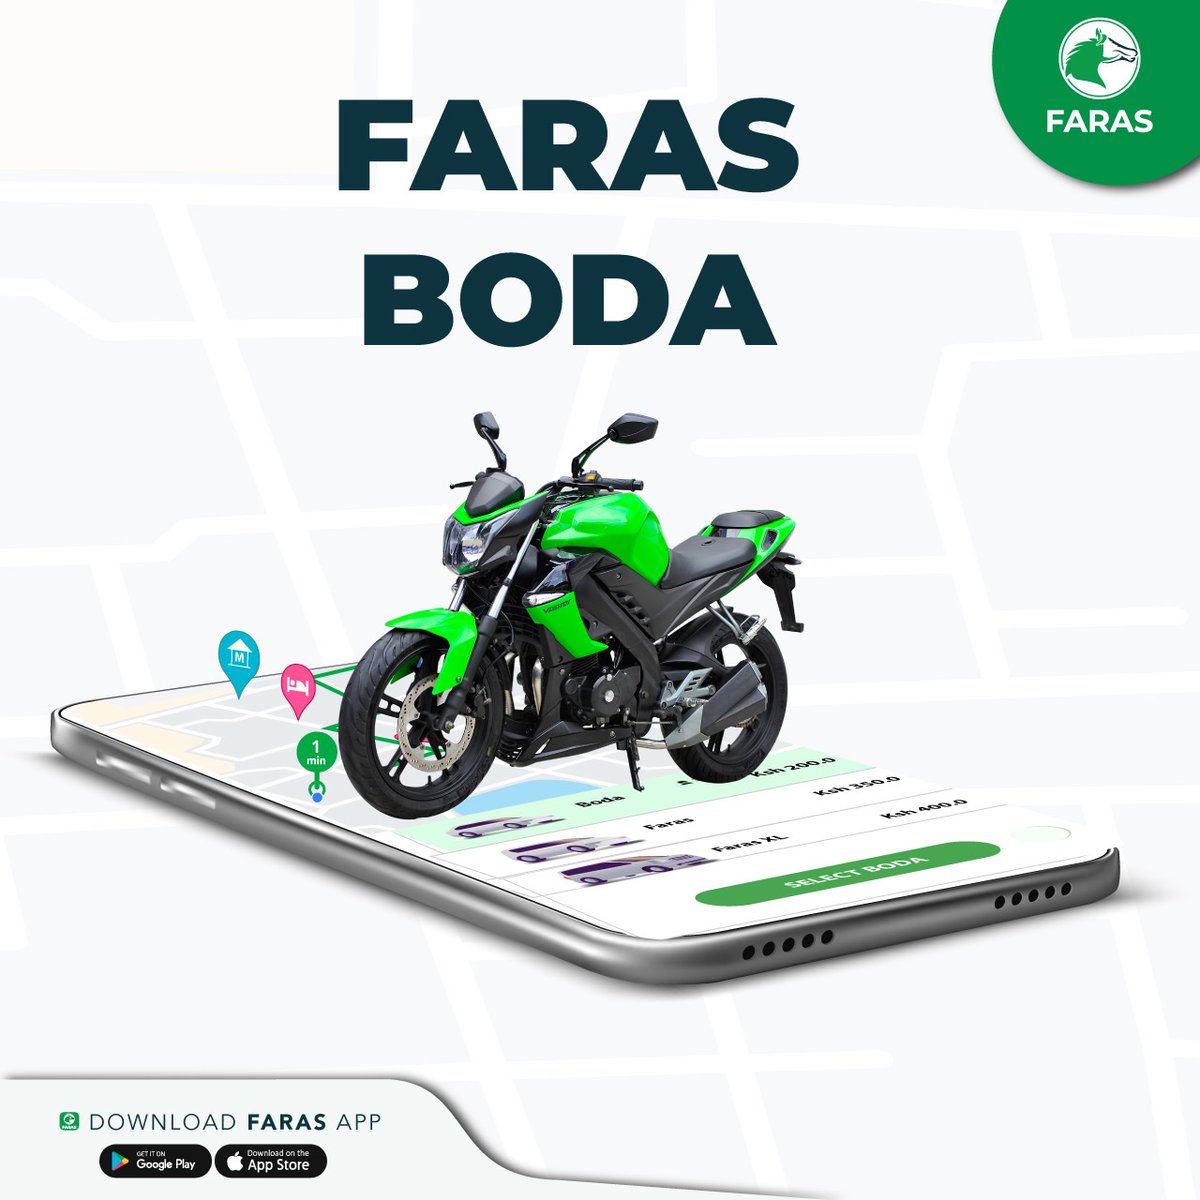 Save time and money with @farasKenya Boda! #RideWithFarasBoda Our motorbike rides are the perfect solution for quick and affordable travel in Nairobi. Experience the convenience of Faras Boda – book your ride and enjoy the speed of our reliable motorbikes.